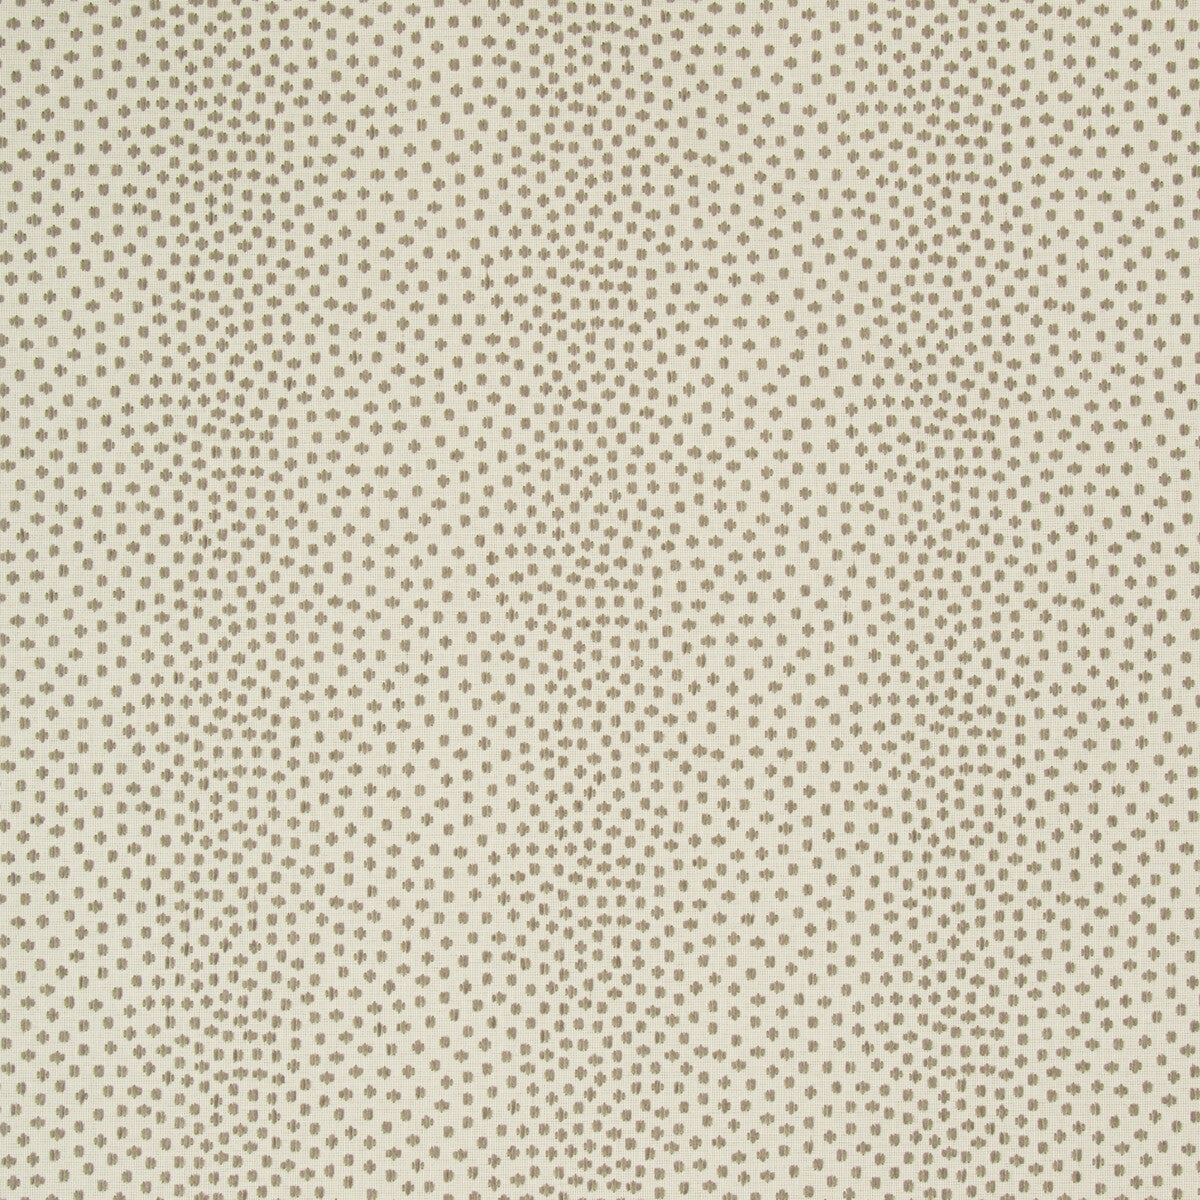 Kravet Design fabric in 34710-11 color - pattern 34710.11.0 - by Kravet Design in the Crypton Home collection